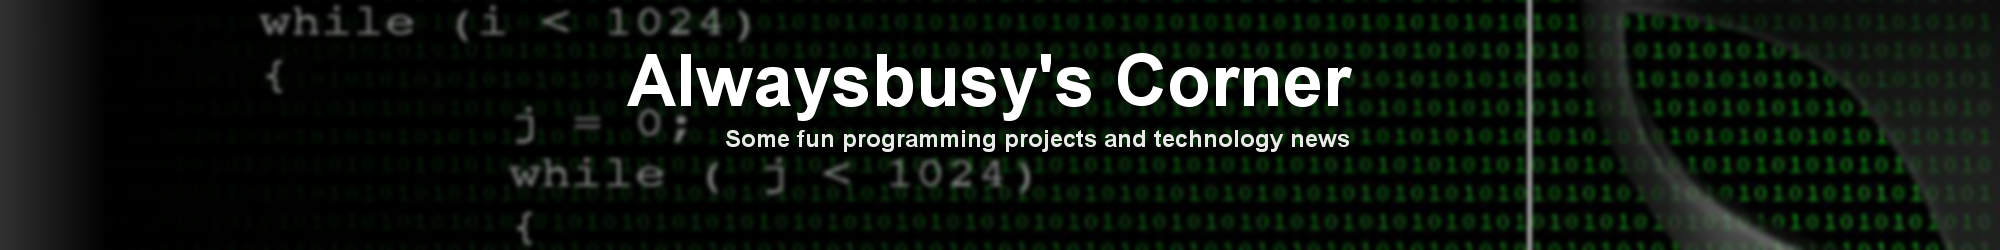 Alwaysbusy's Corner – Some fun programming projects and technology news